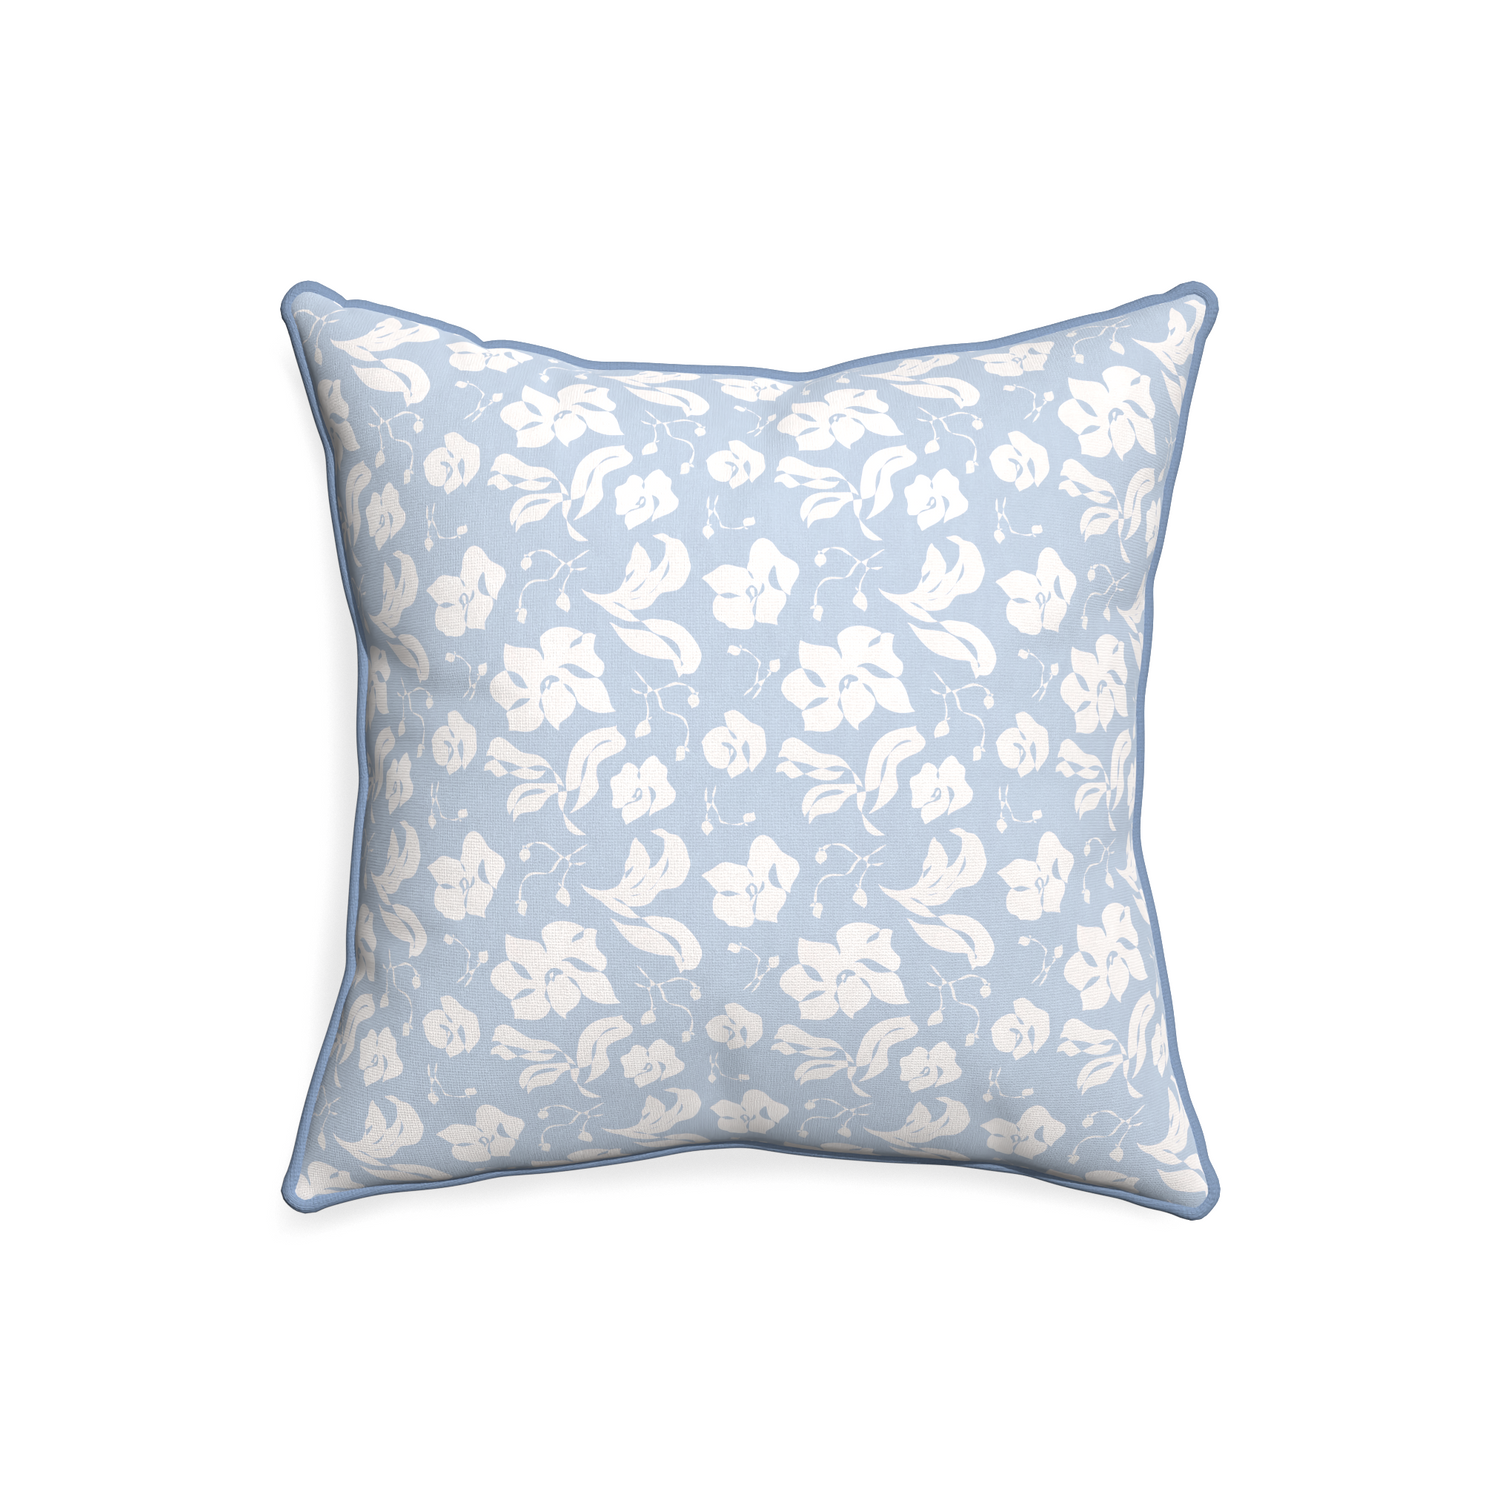 20-square georgia custom cornflower blue floralpillow with sky piping on white background